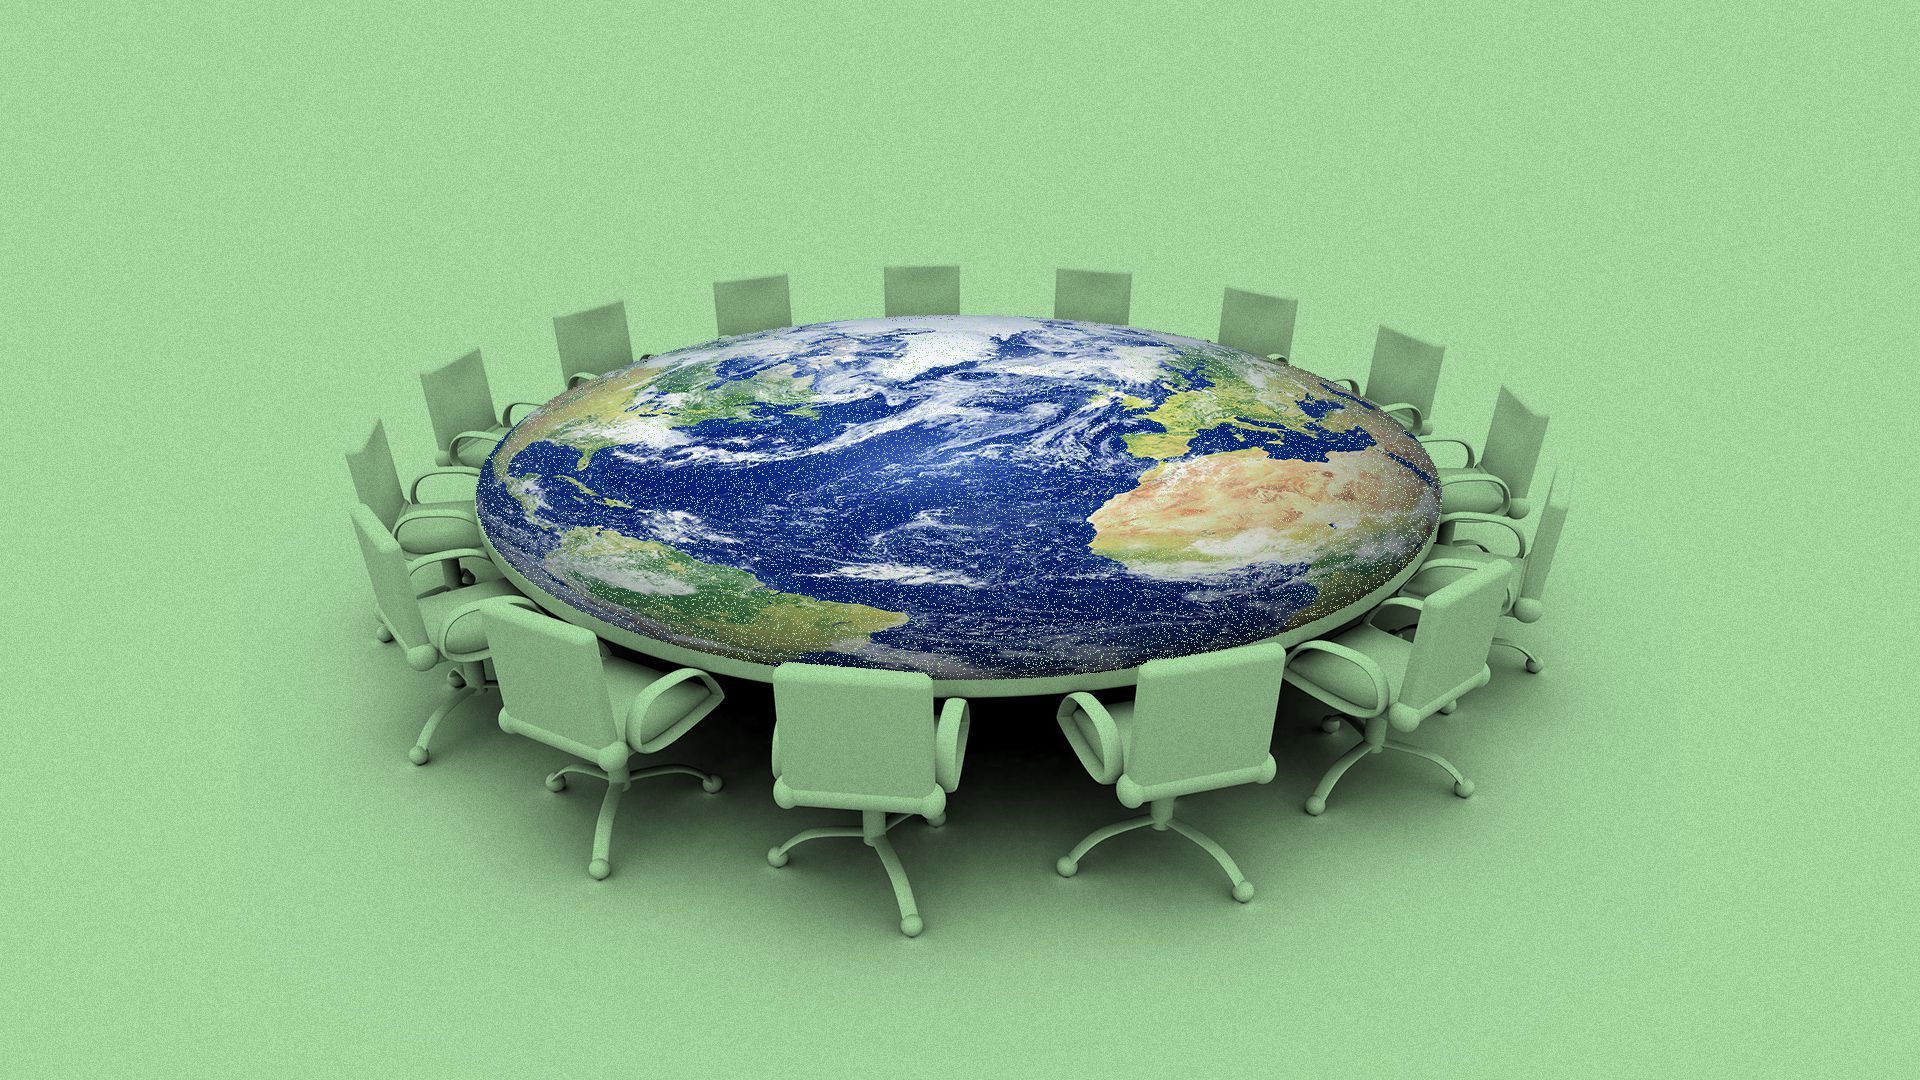 Illustration of a green round table with the Earth as the top of the table.